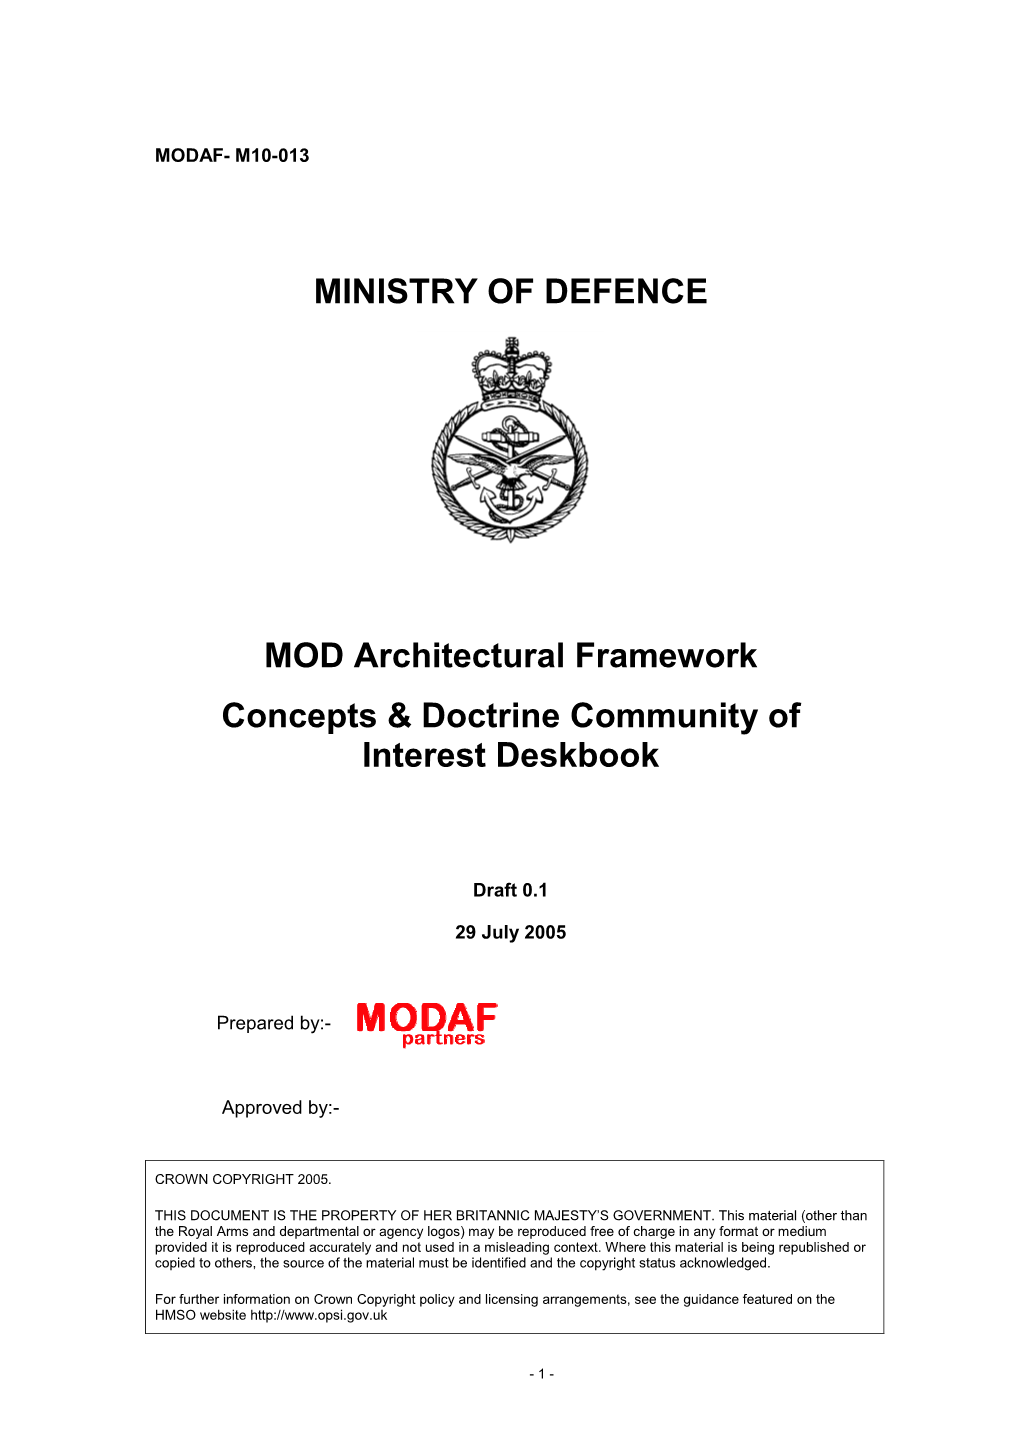 MINISTRY of DEFENCE MOD Architectural Framework Concepts